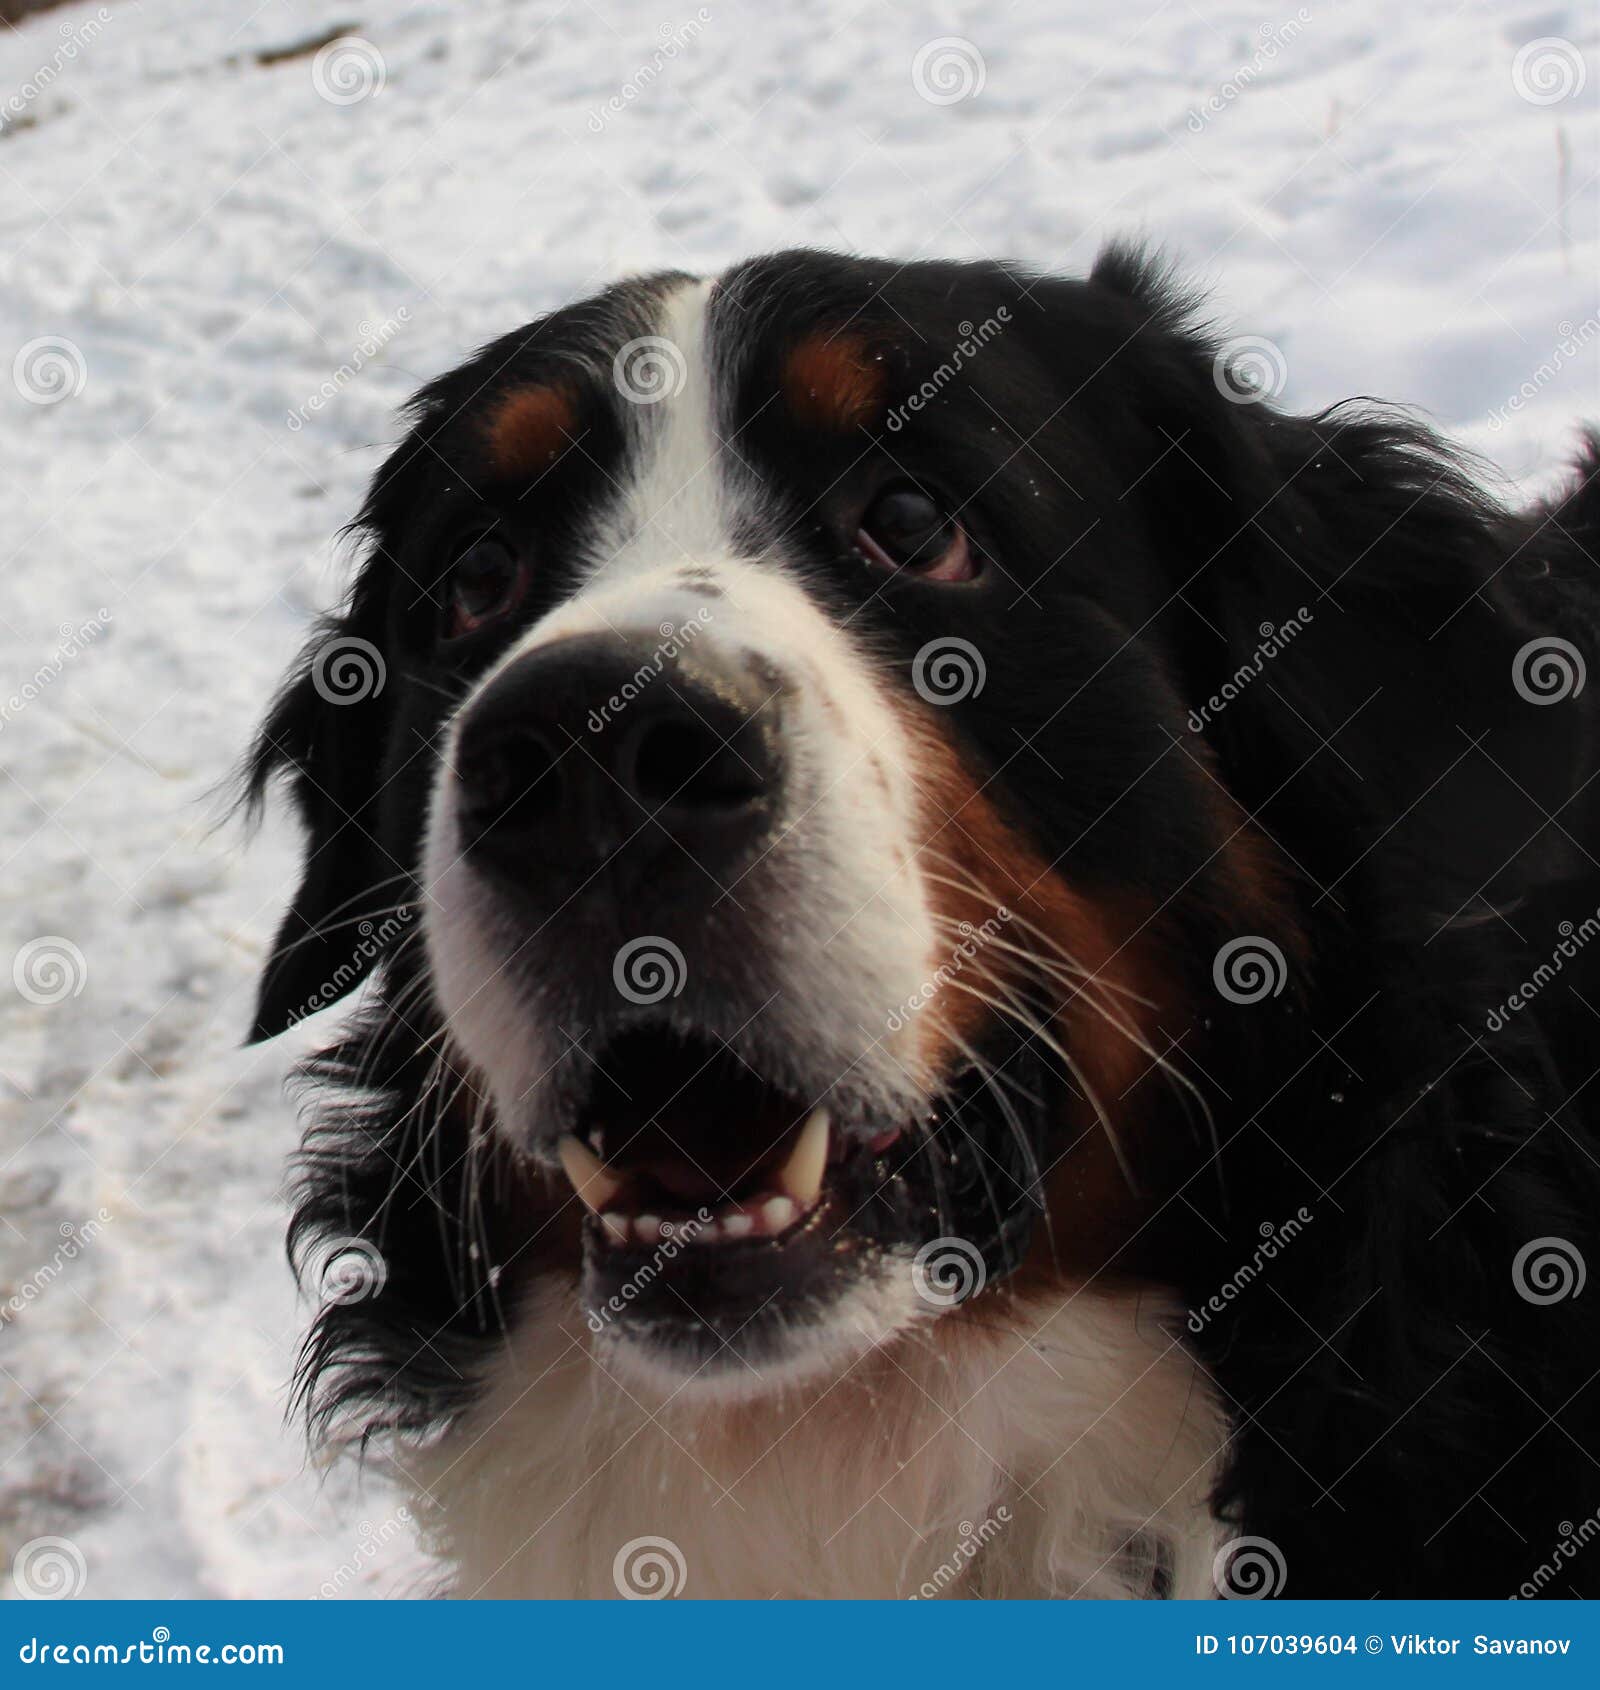 bernese mountain dog on a walk in the park.